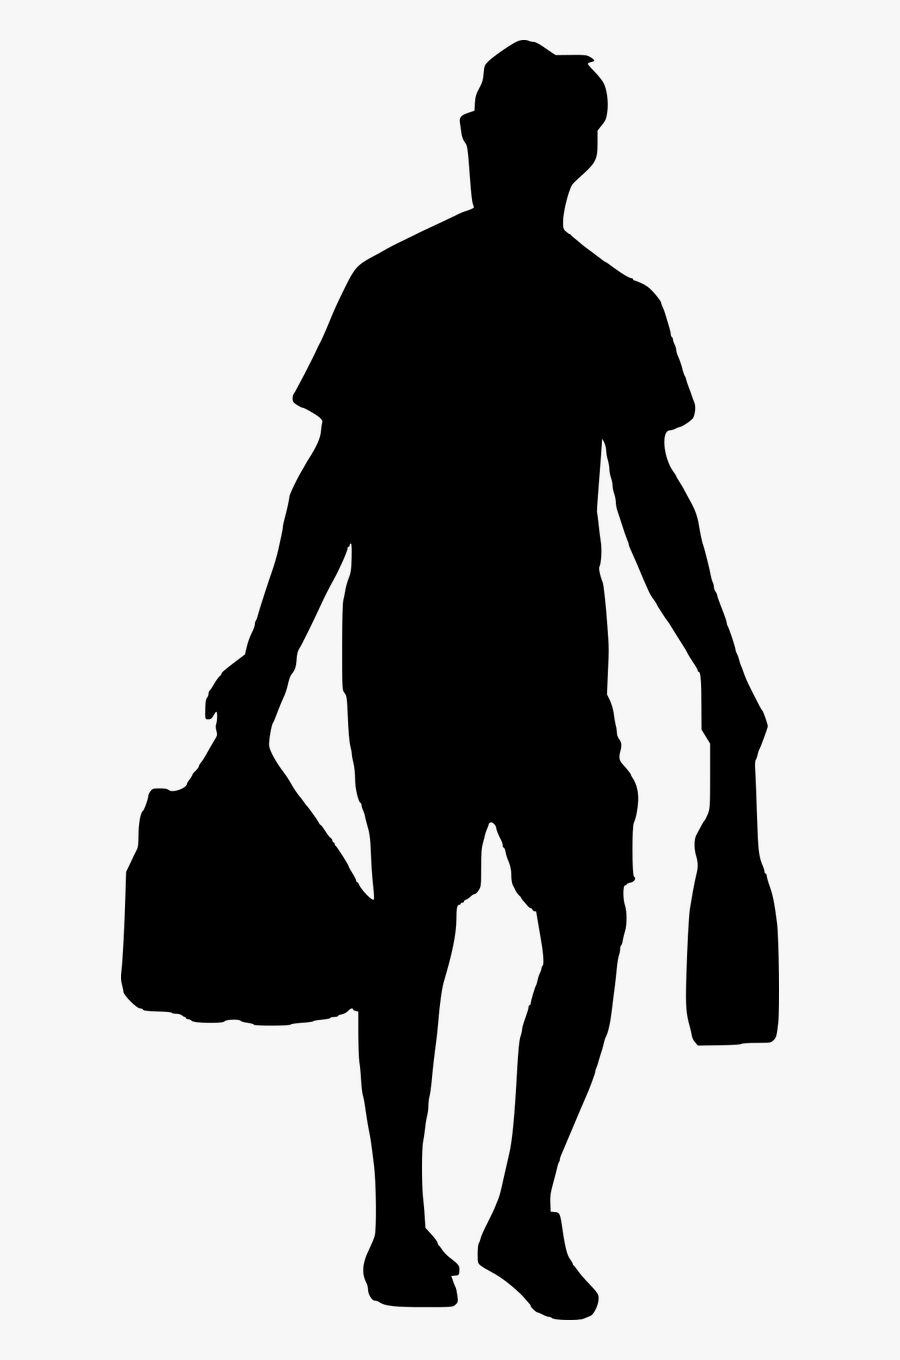 Shopping Bags Man Walking - People Shopping Silhouette Png, Transparent Clipart